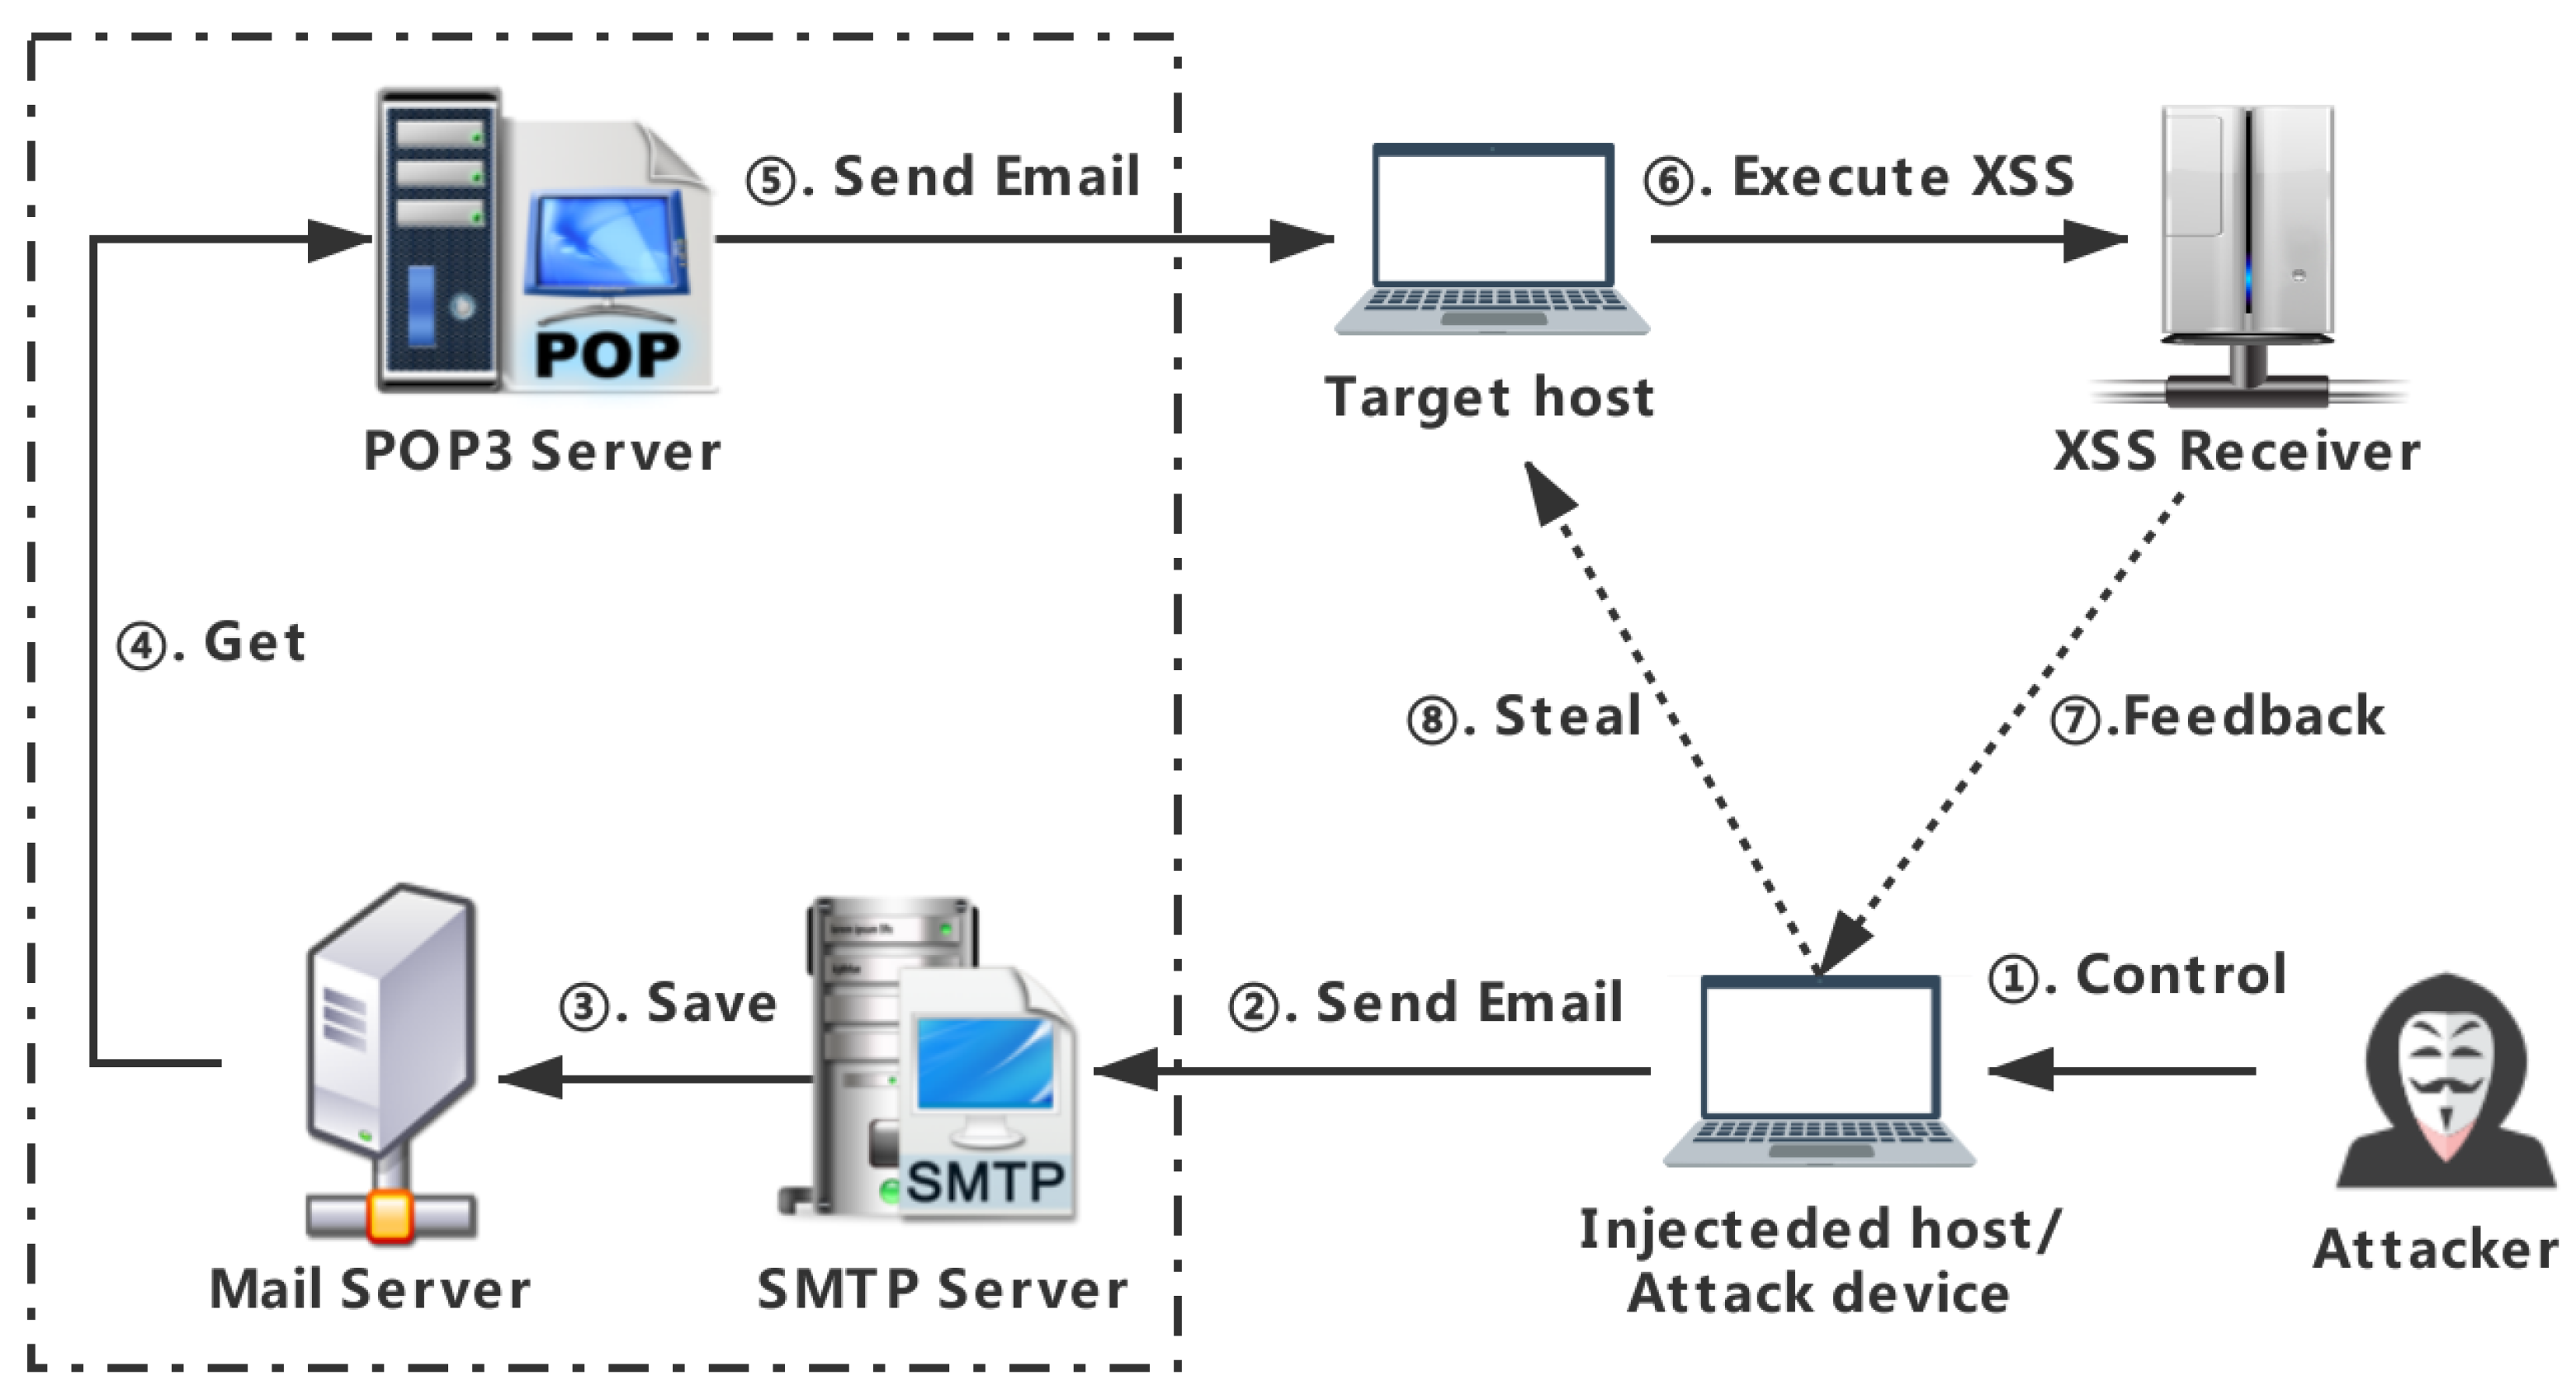 Advanced Cross-Site Scripting (XSS) Attacks, Payloads And Bypass